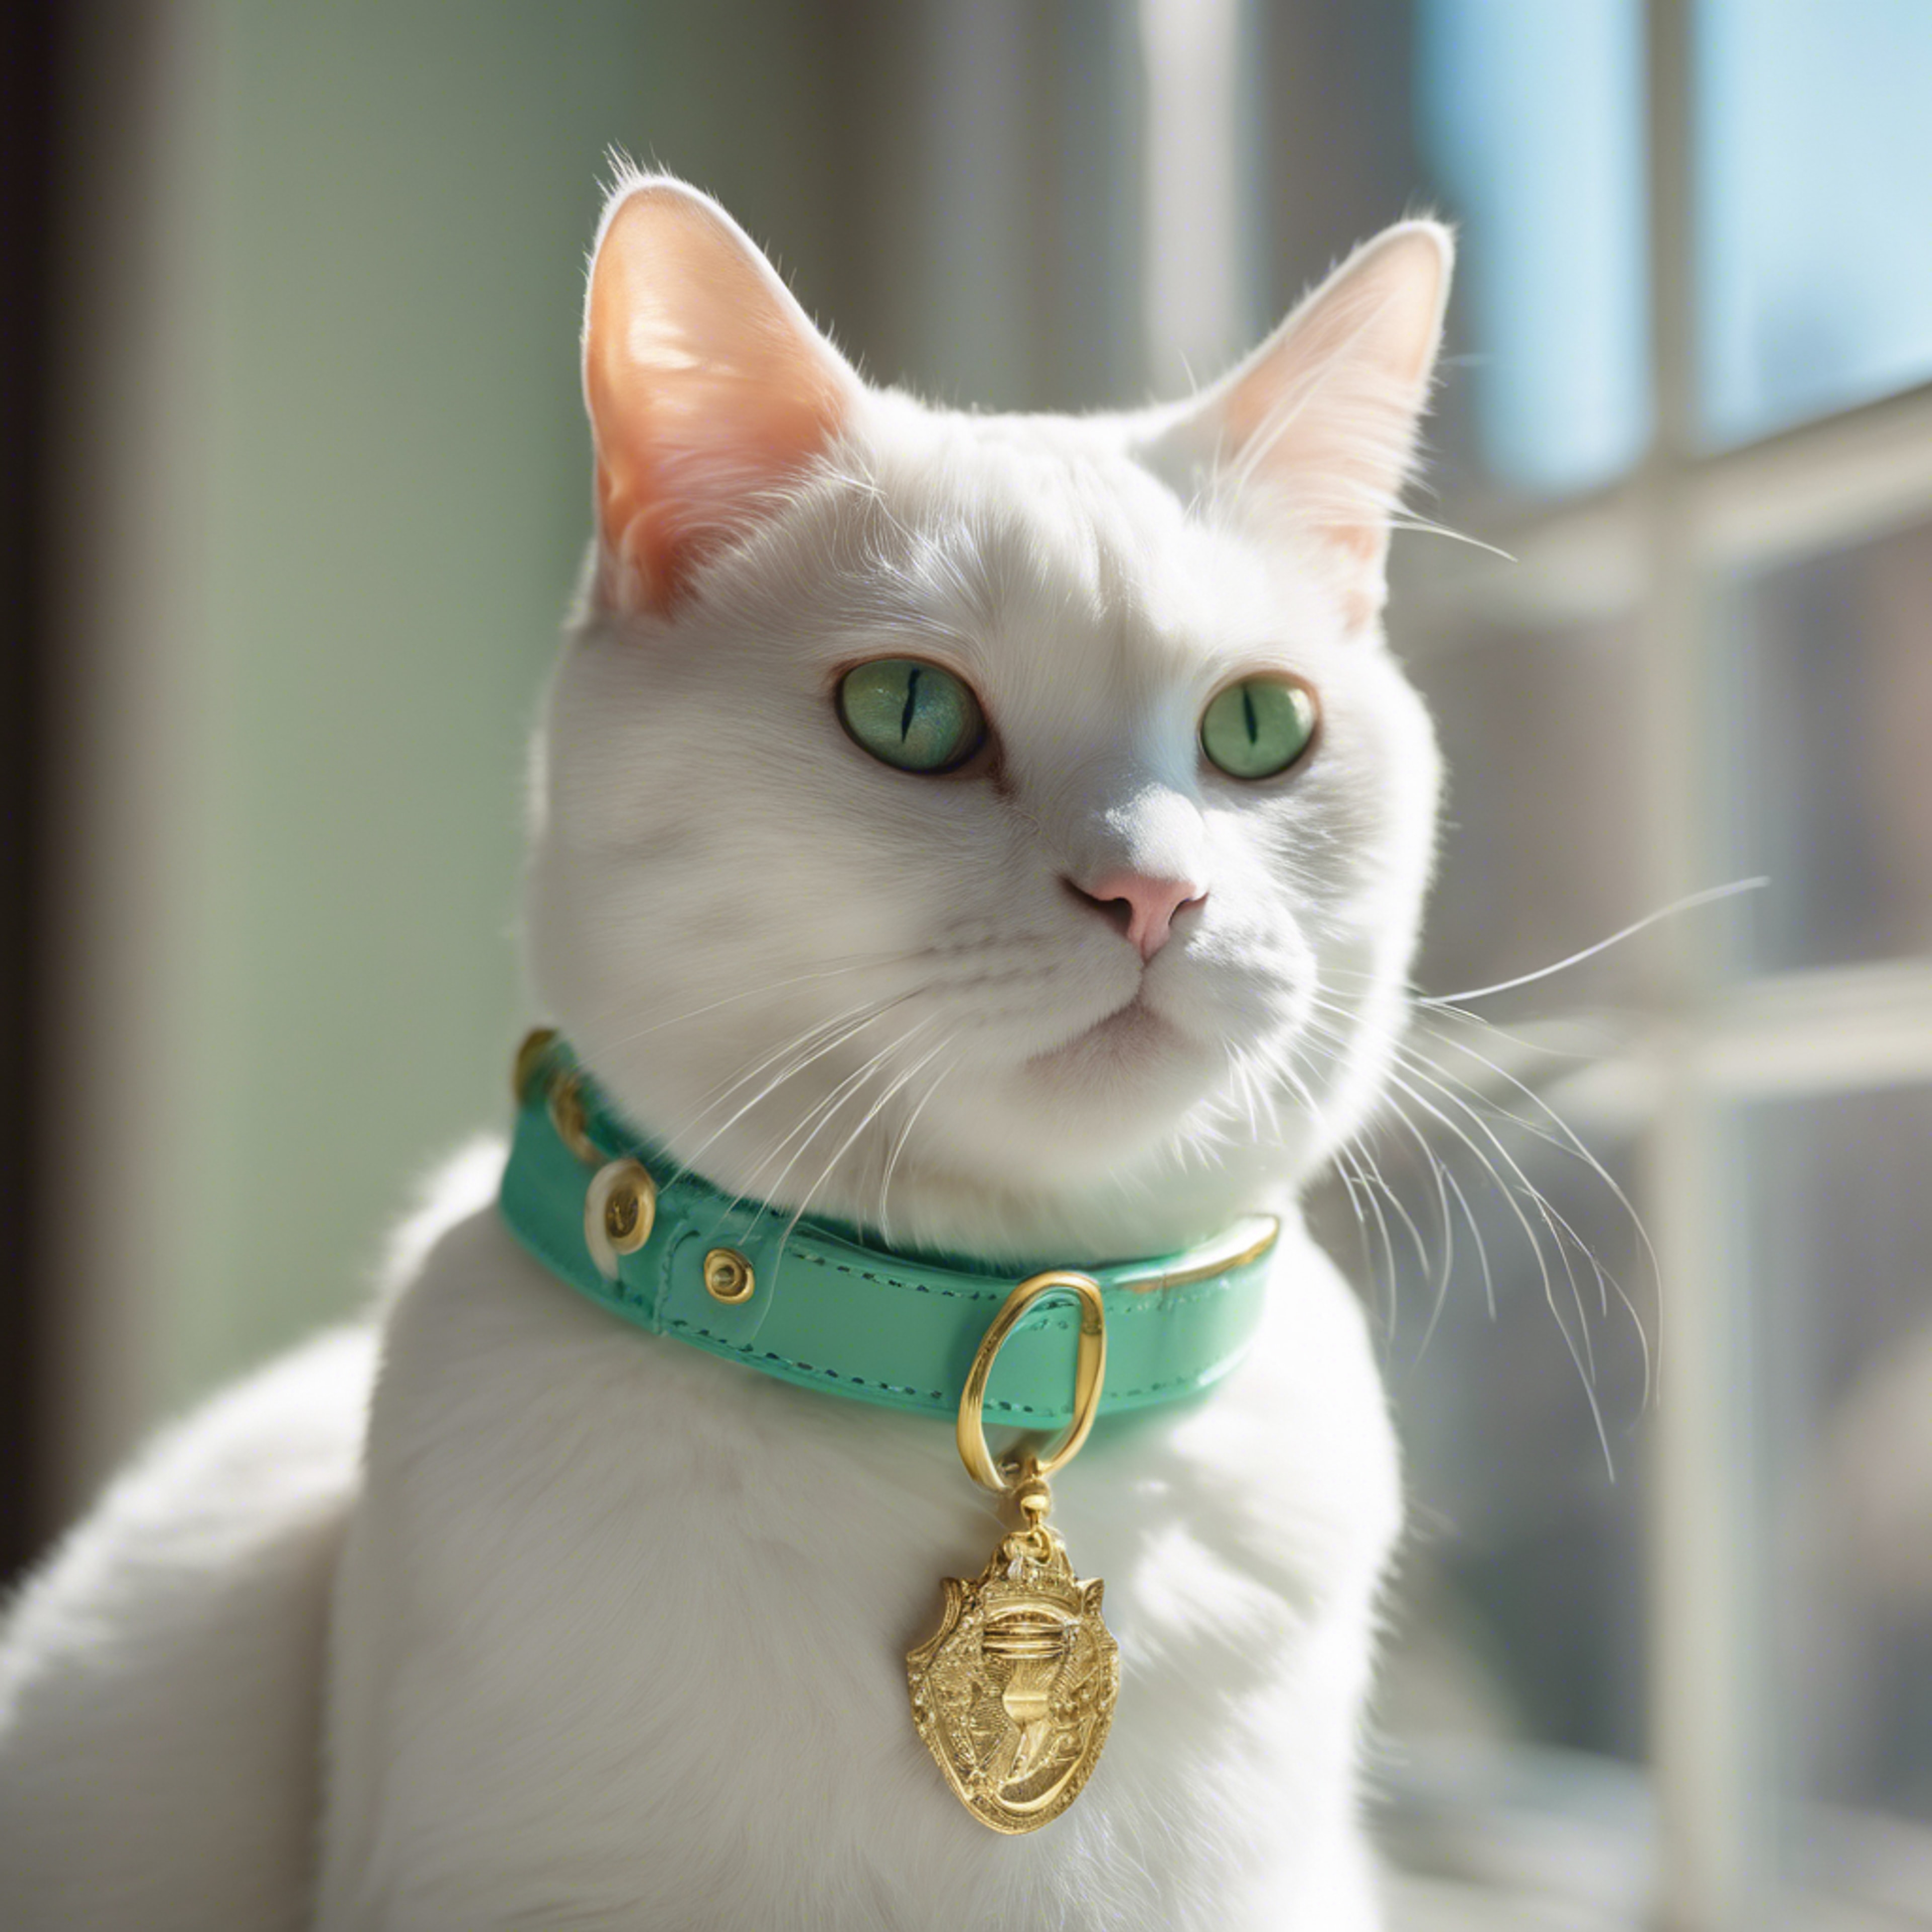 An adorable white cat wearing a preppy mint green collar with a gold buckle sitting in a sunny window. 벽지[8de0351476e04873aa5e]